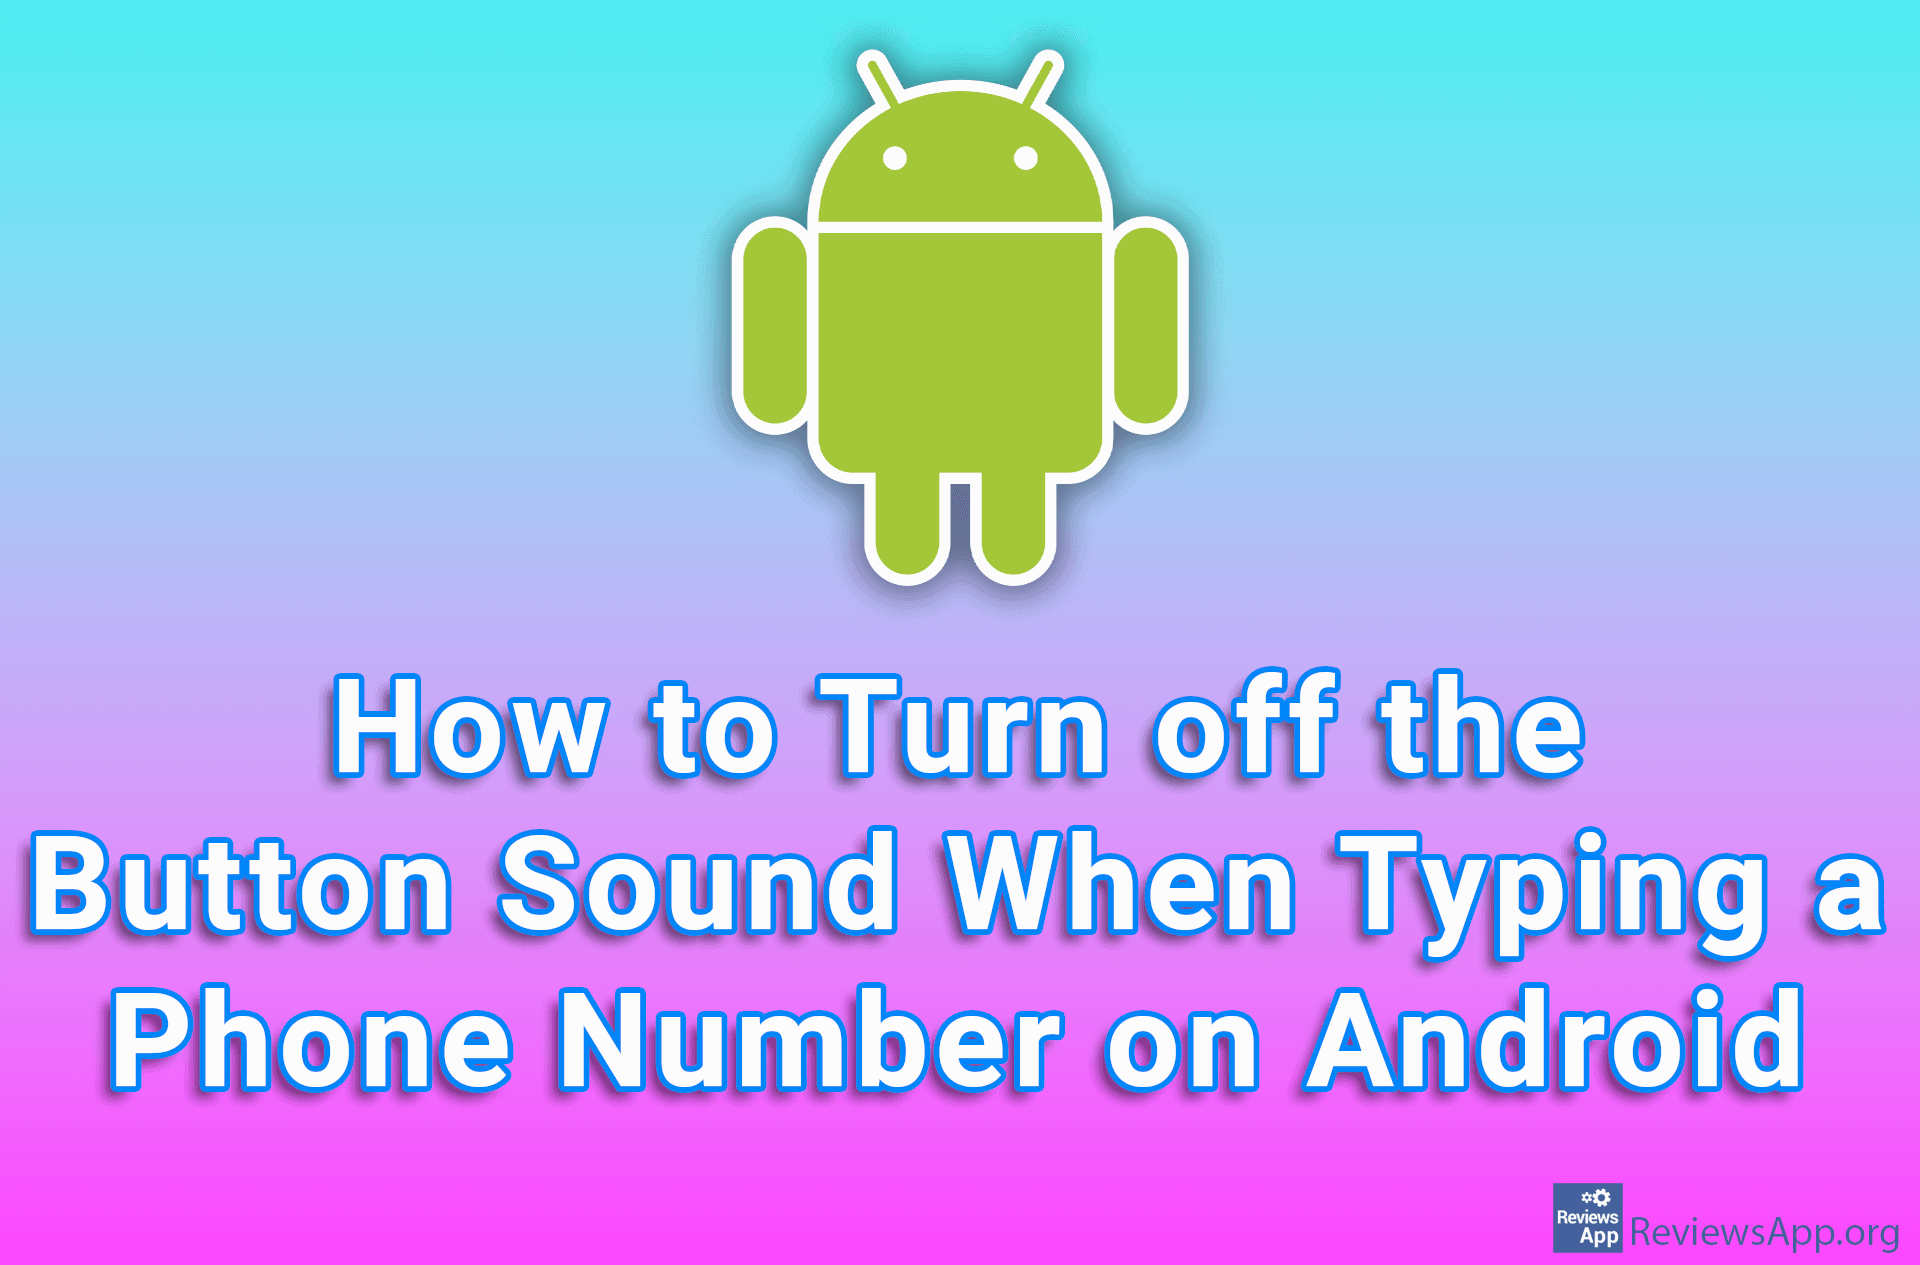 How to Turn off the Button Sound When Typing a Phone Number on Android